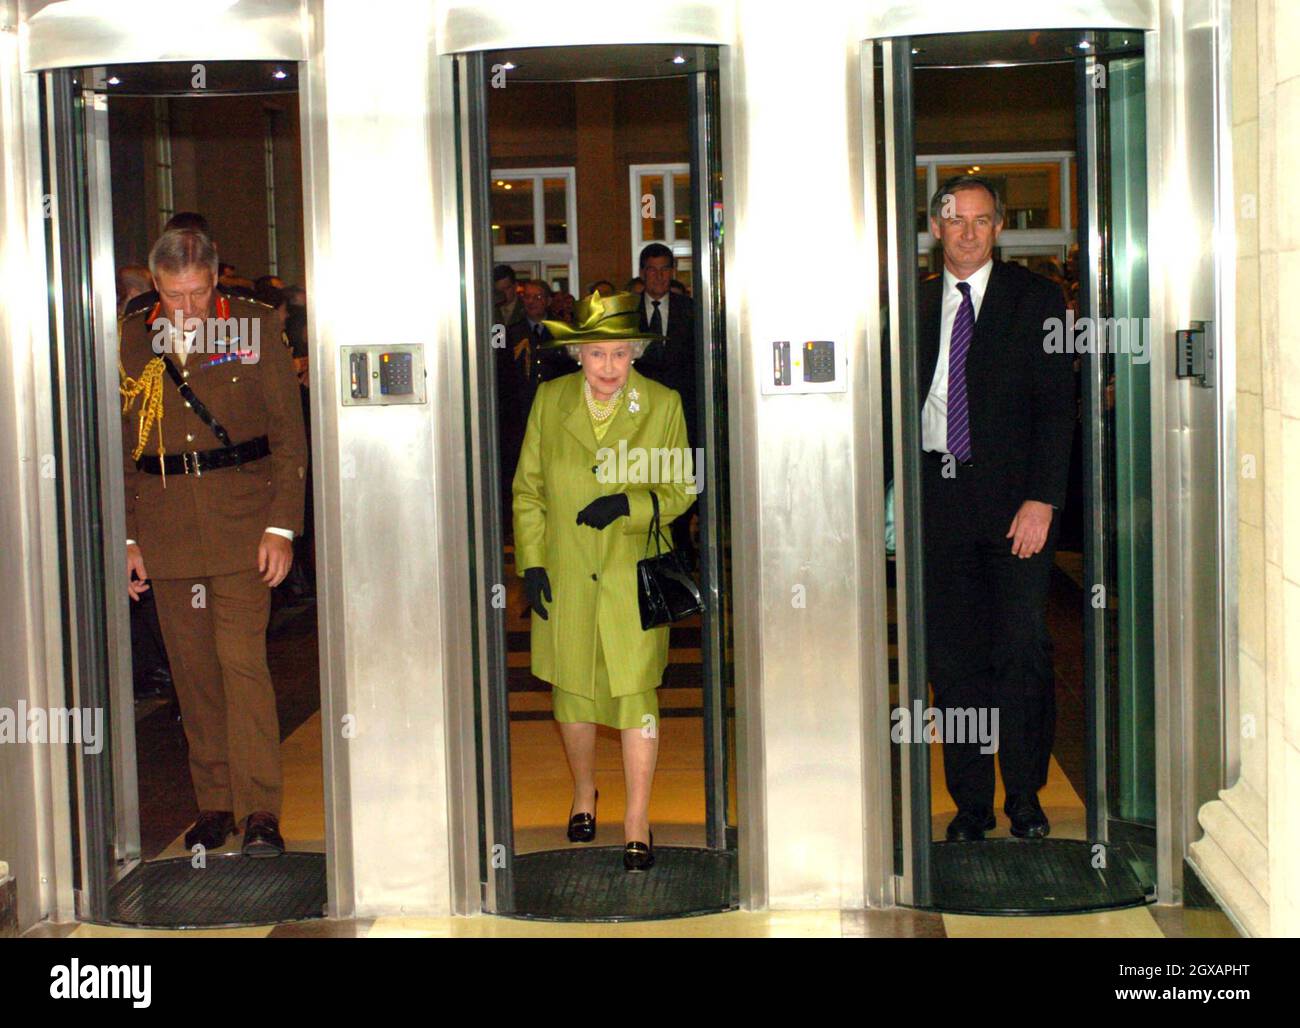 HM Queen Elizabeth II with the Chief of Defence Staff Sir Michael Walker and the Defence Secretary Geoff Hoon pictured entering the Ministry of Defence, London. Anwar Hussein/allactiondigital.com     Stock Photo